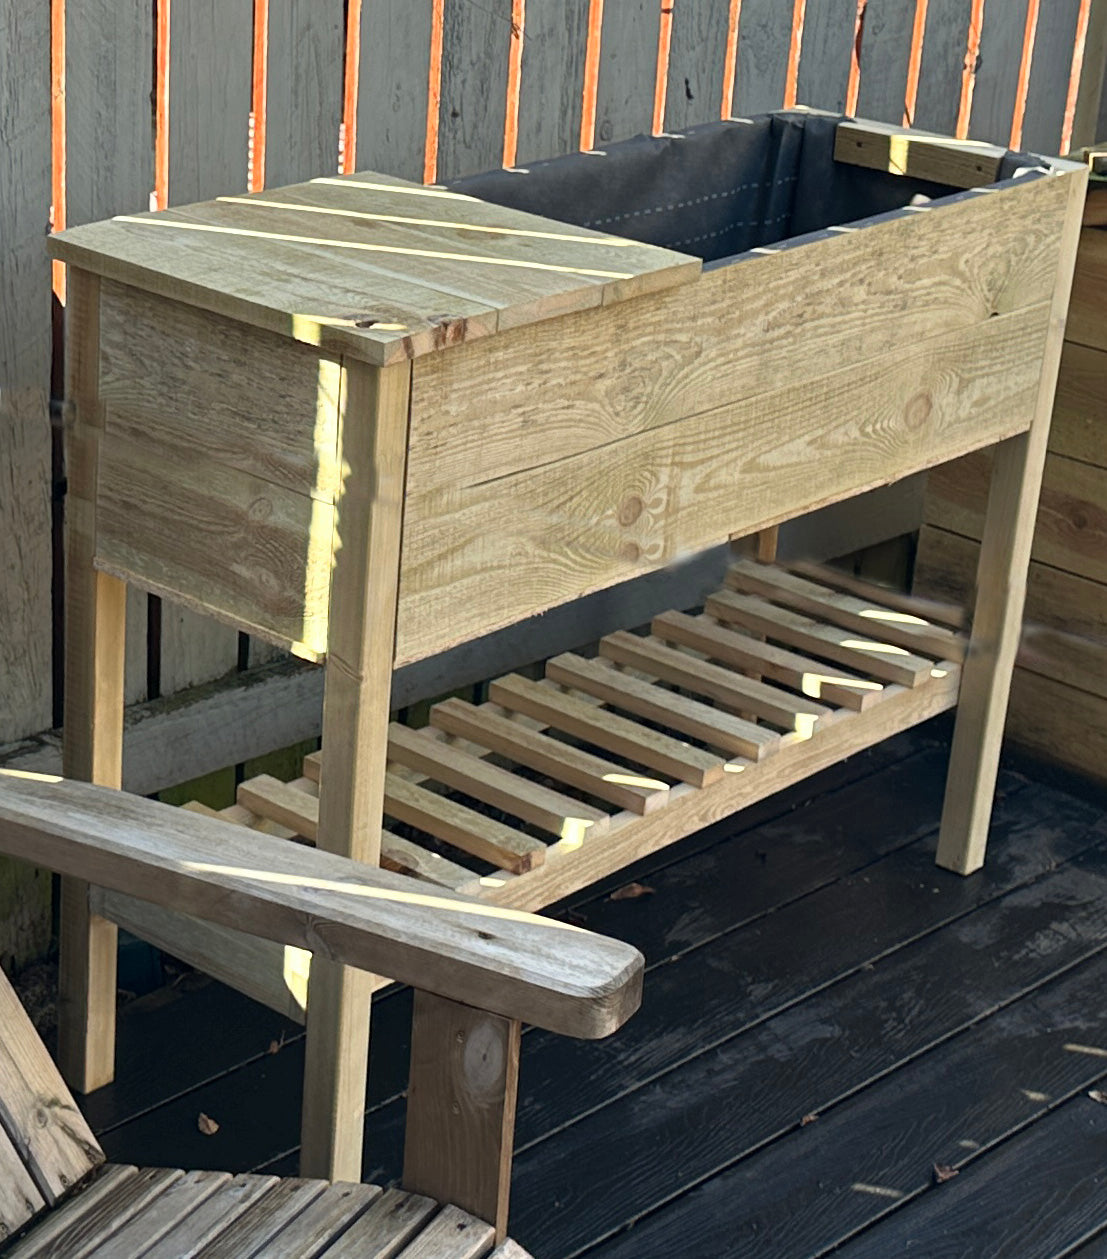 Garden and allotment planter with storage